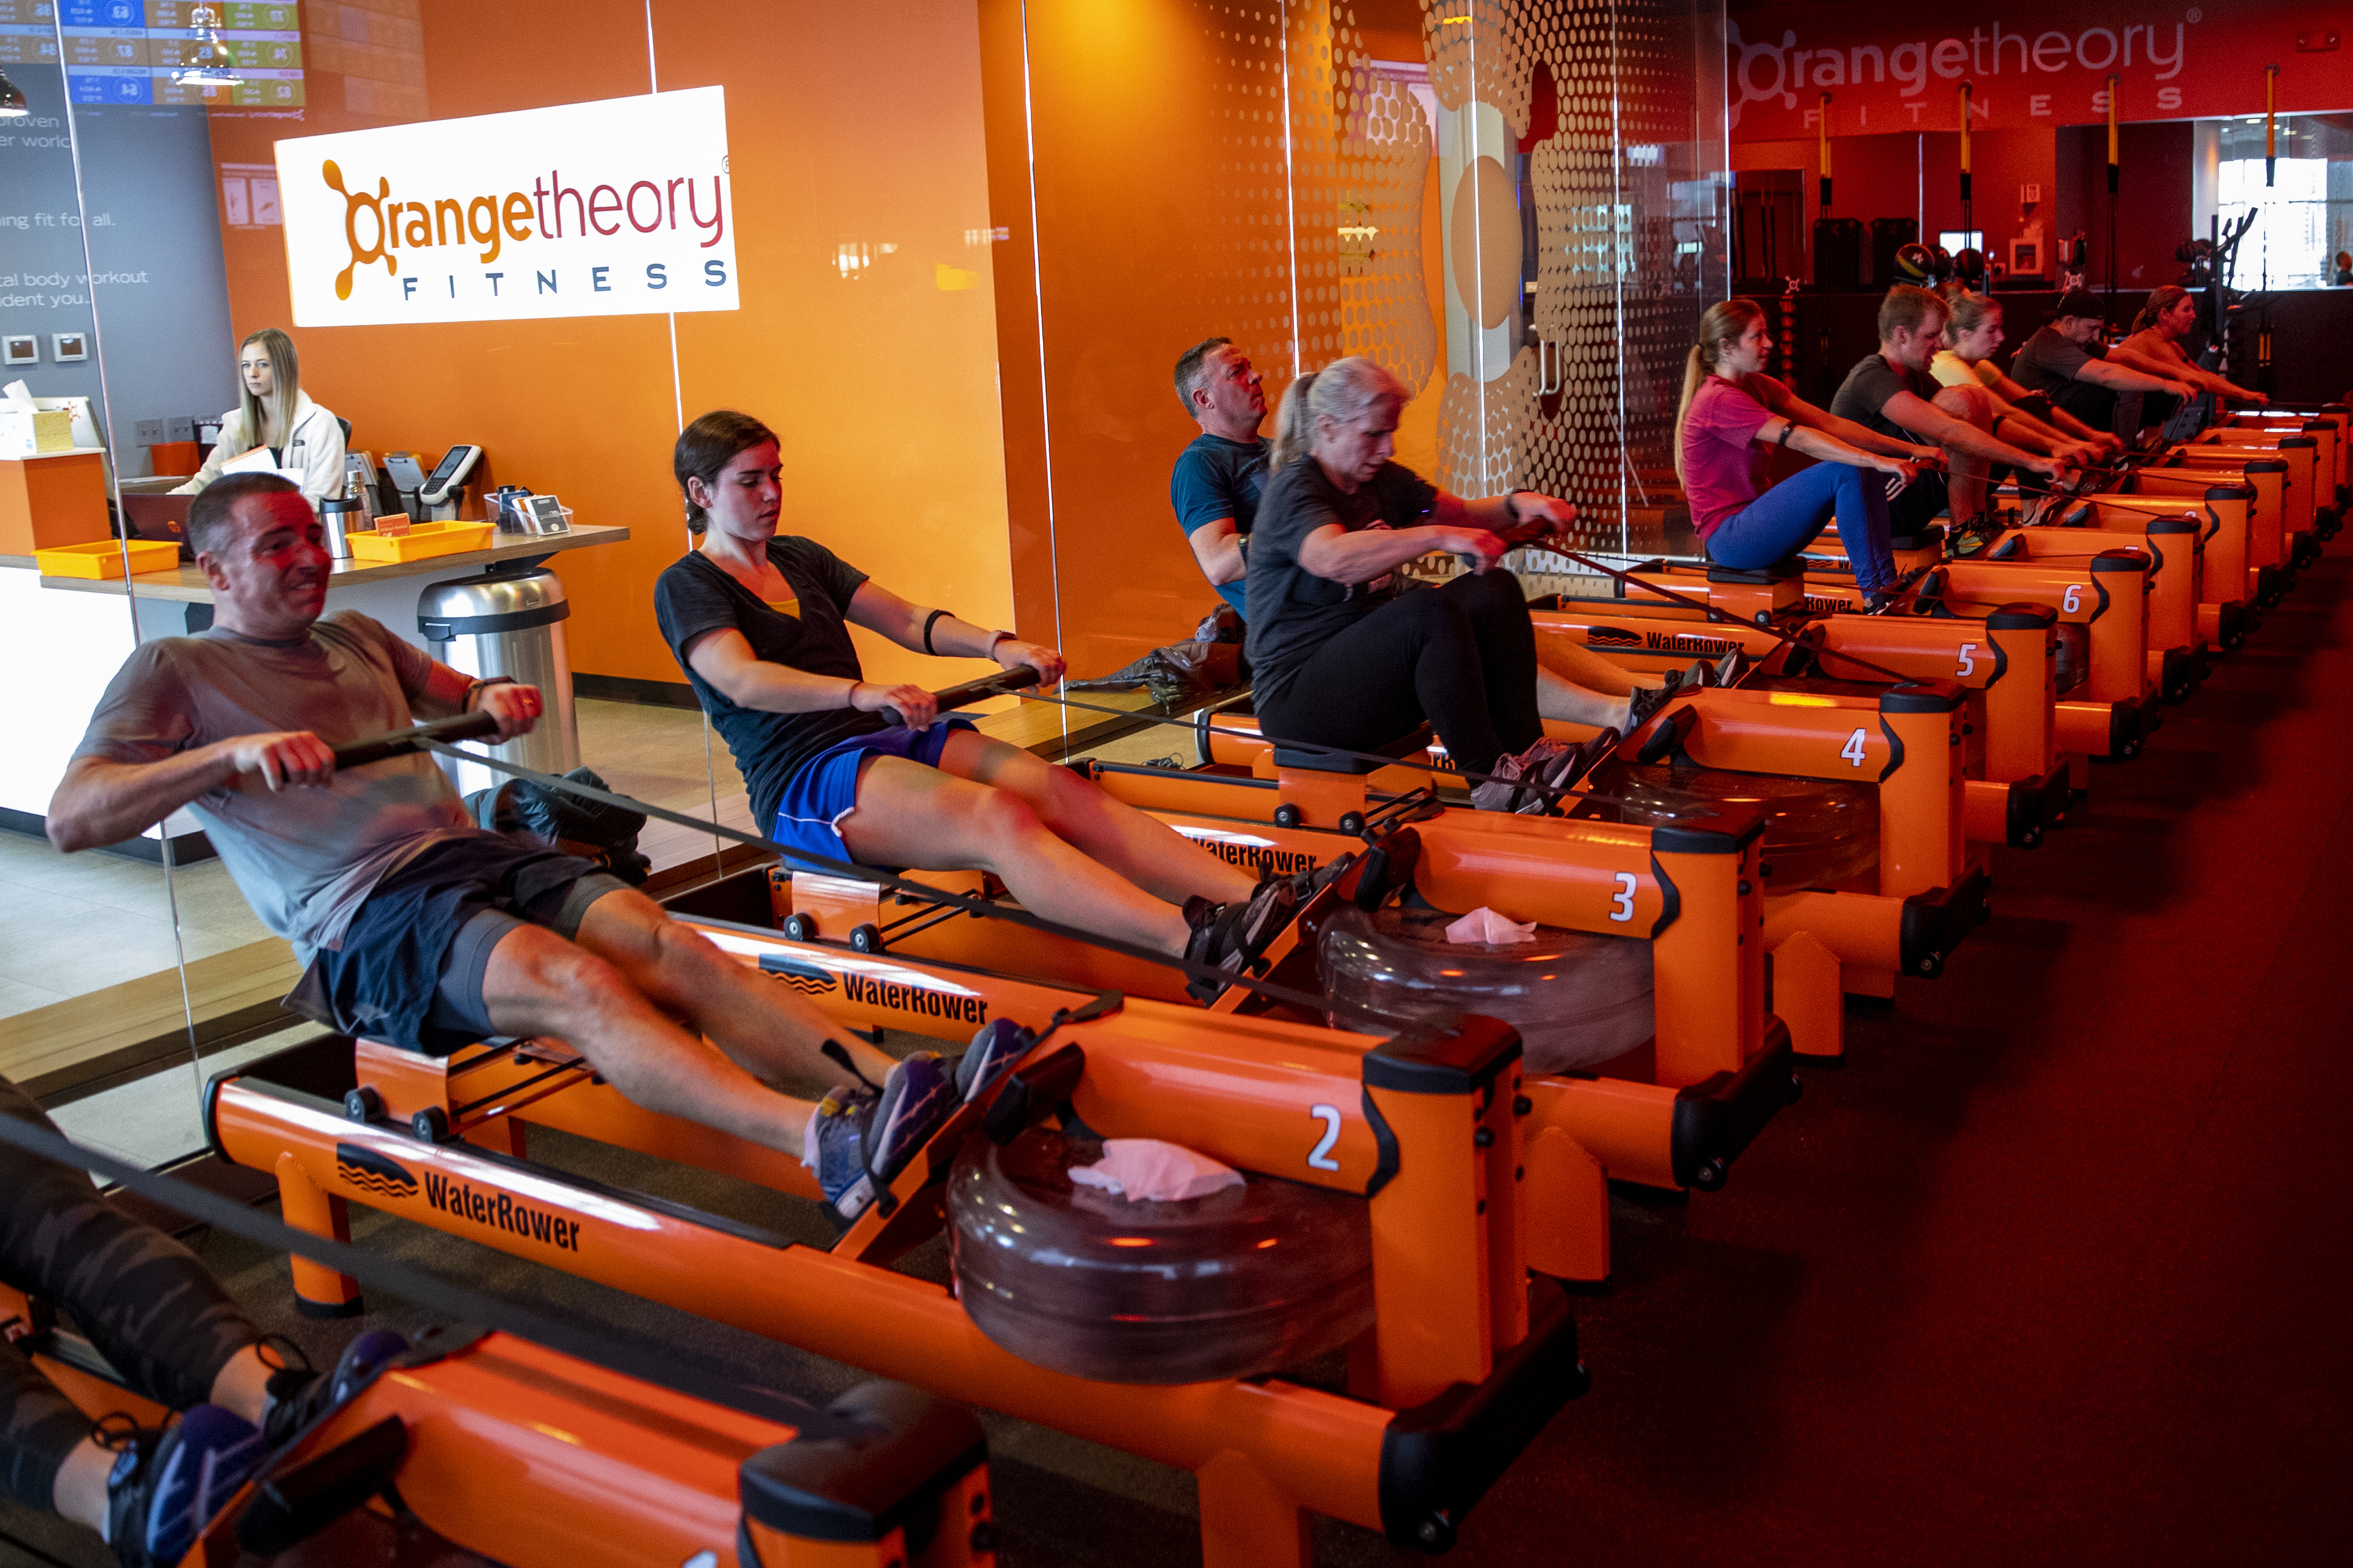 Orangetheory Fitness Chicago-River West - OTF River West is opening during  an exciting time in the Orangetheory Fitness family! Our studio will  feature the latest technological integrations as well as updated studio